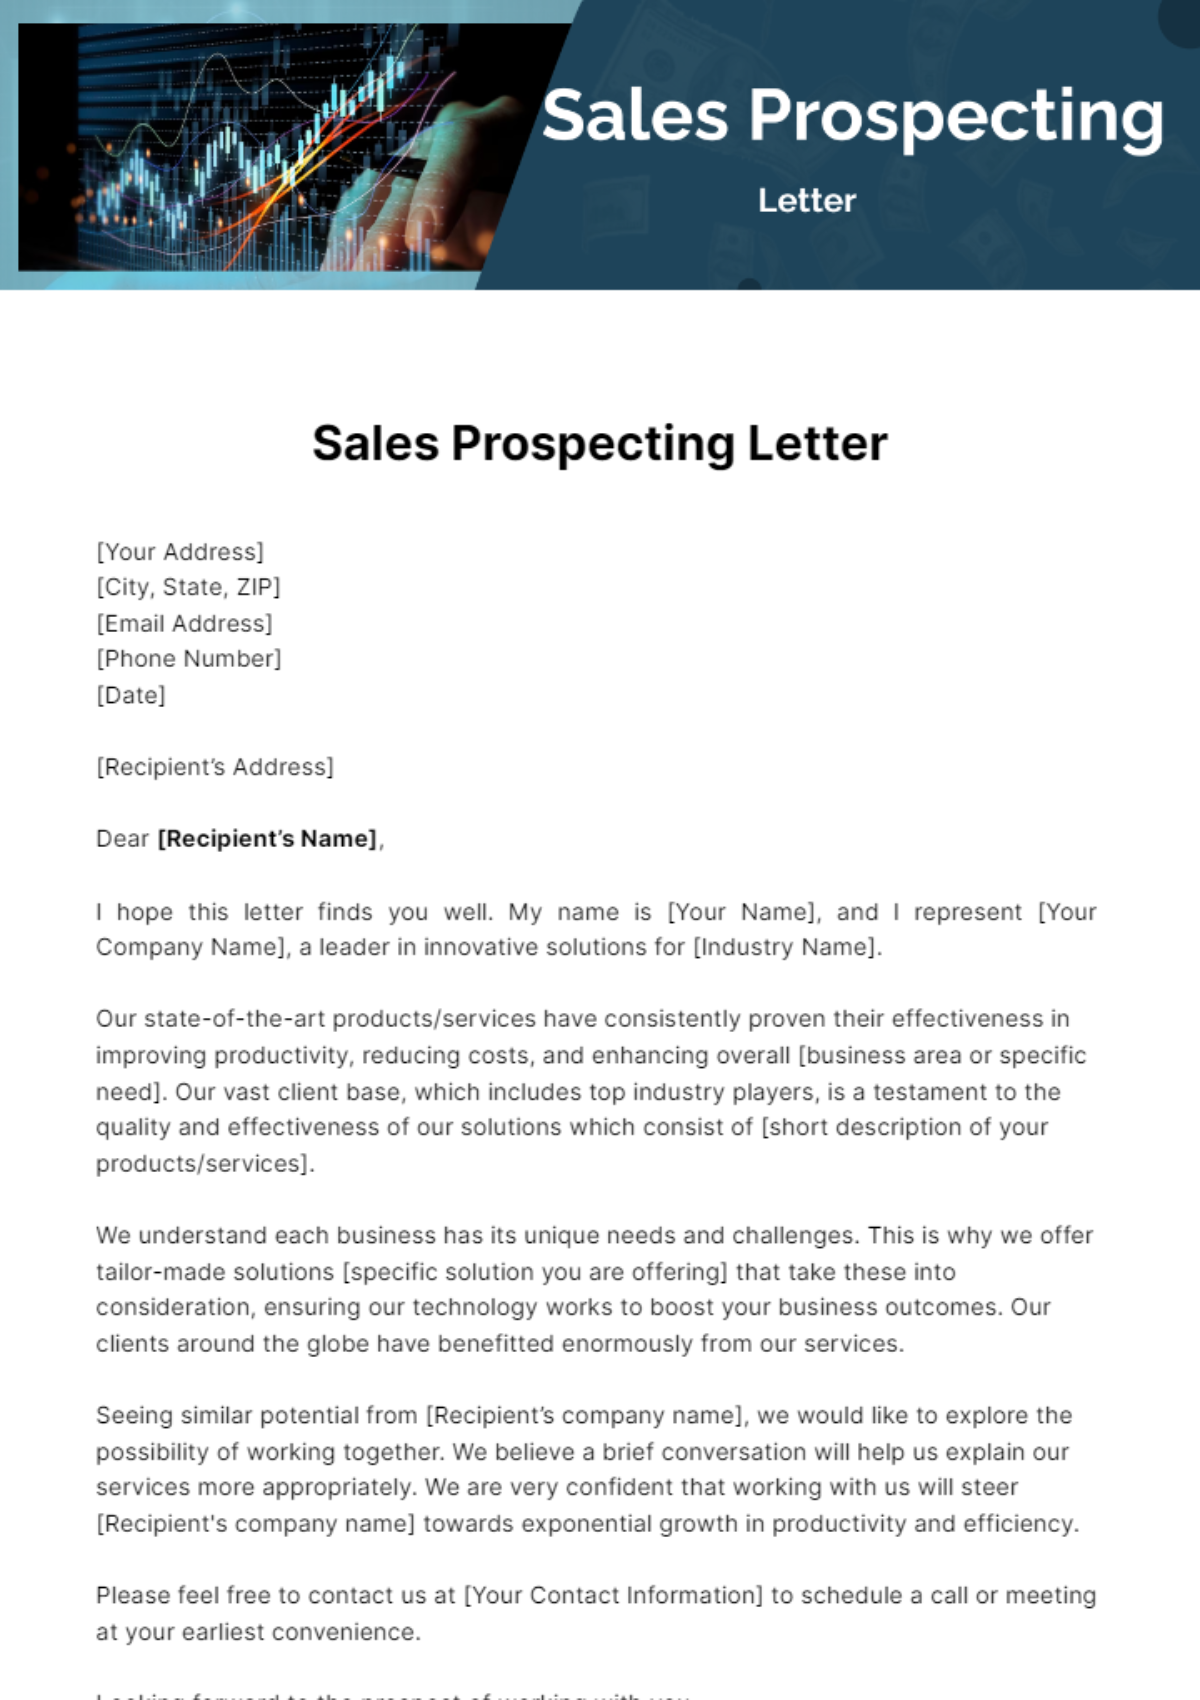 Sales Prospecting Letter Template